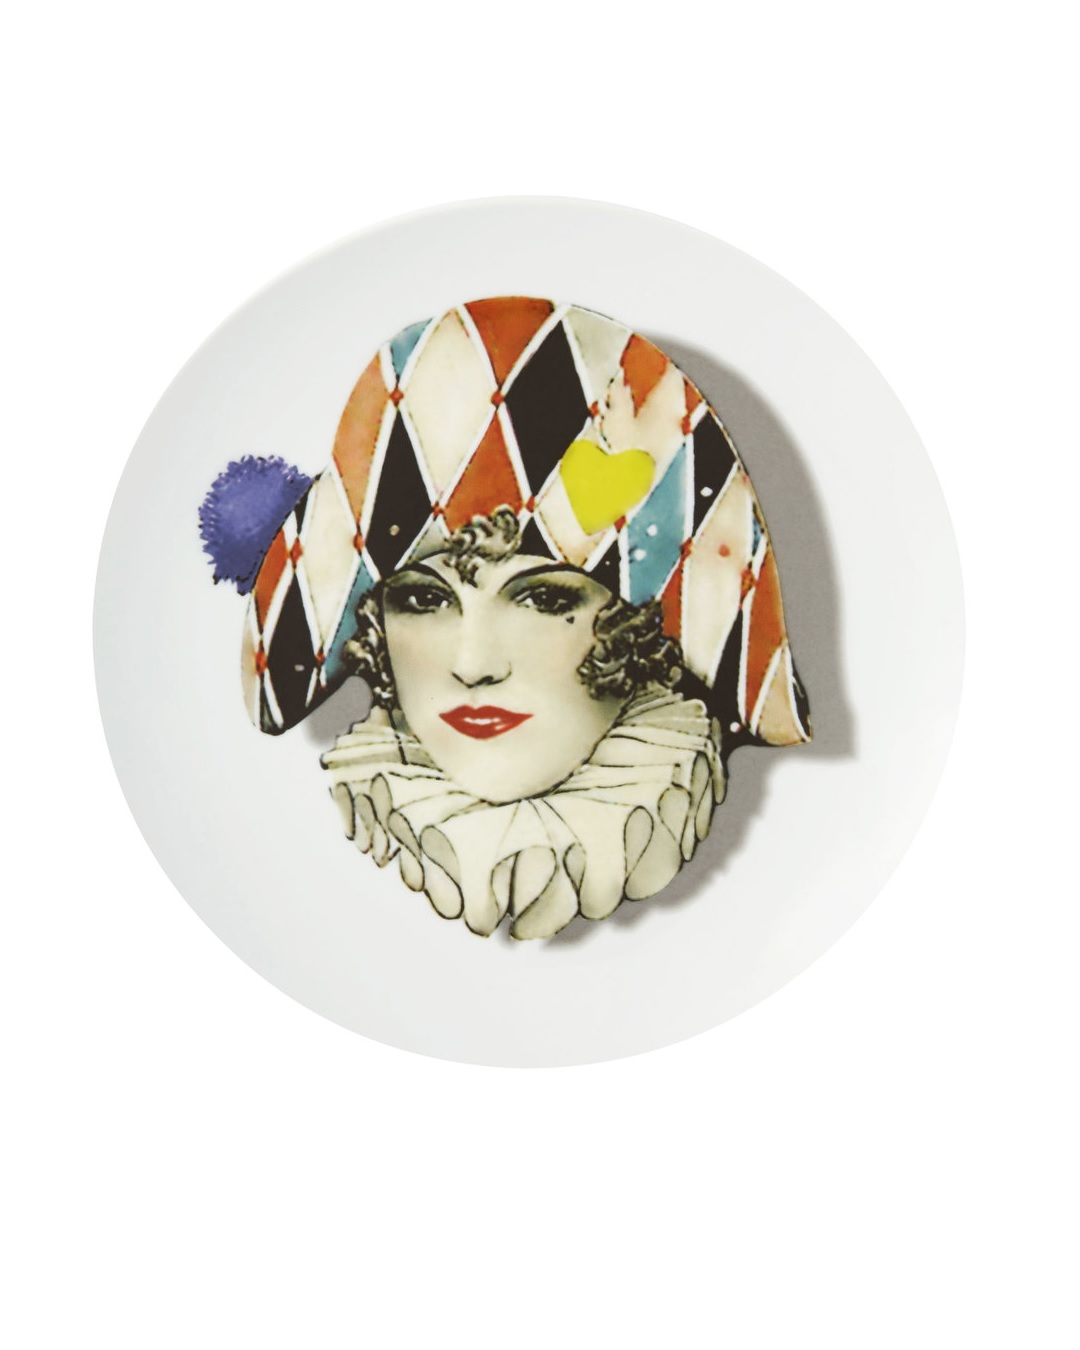 Christian Lacroix Harlequin plate